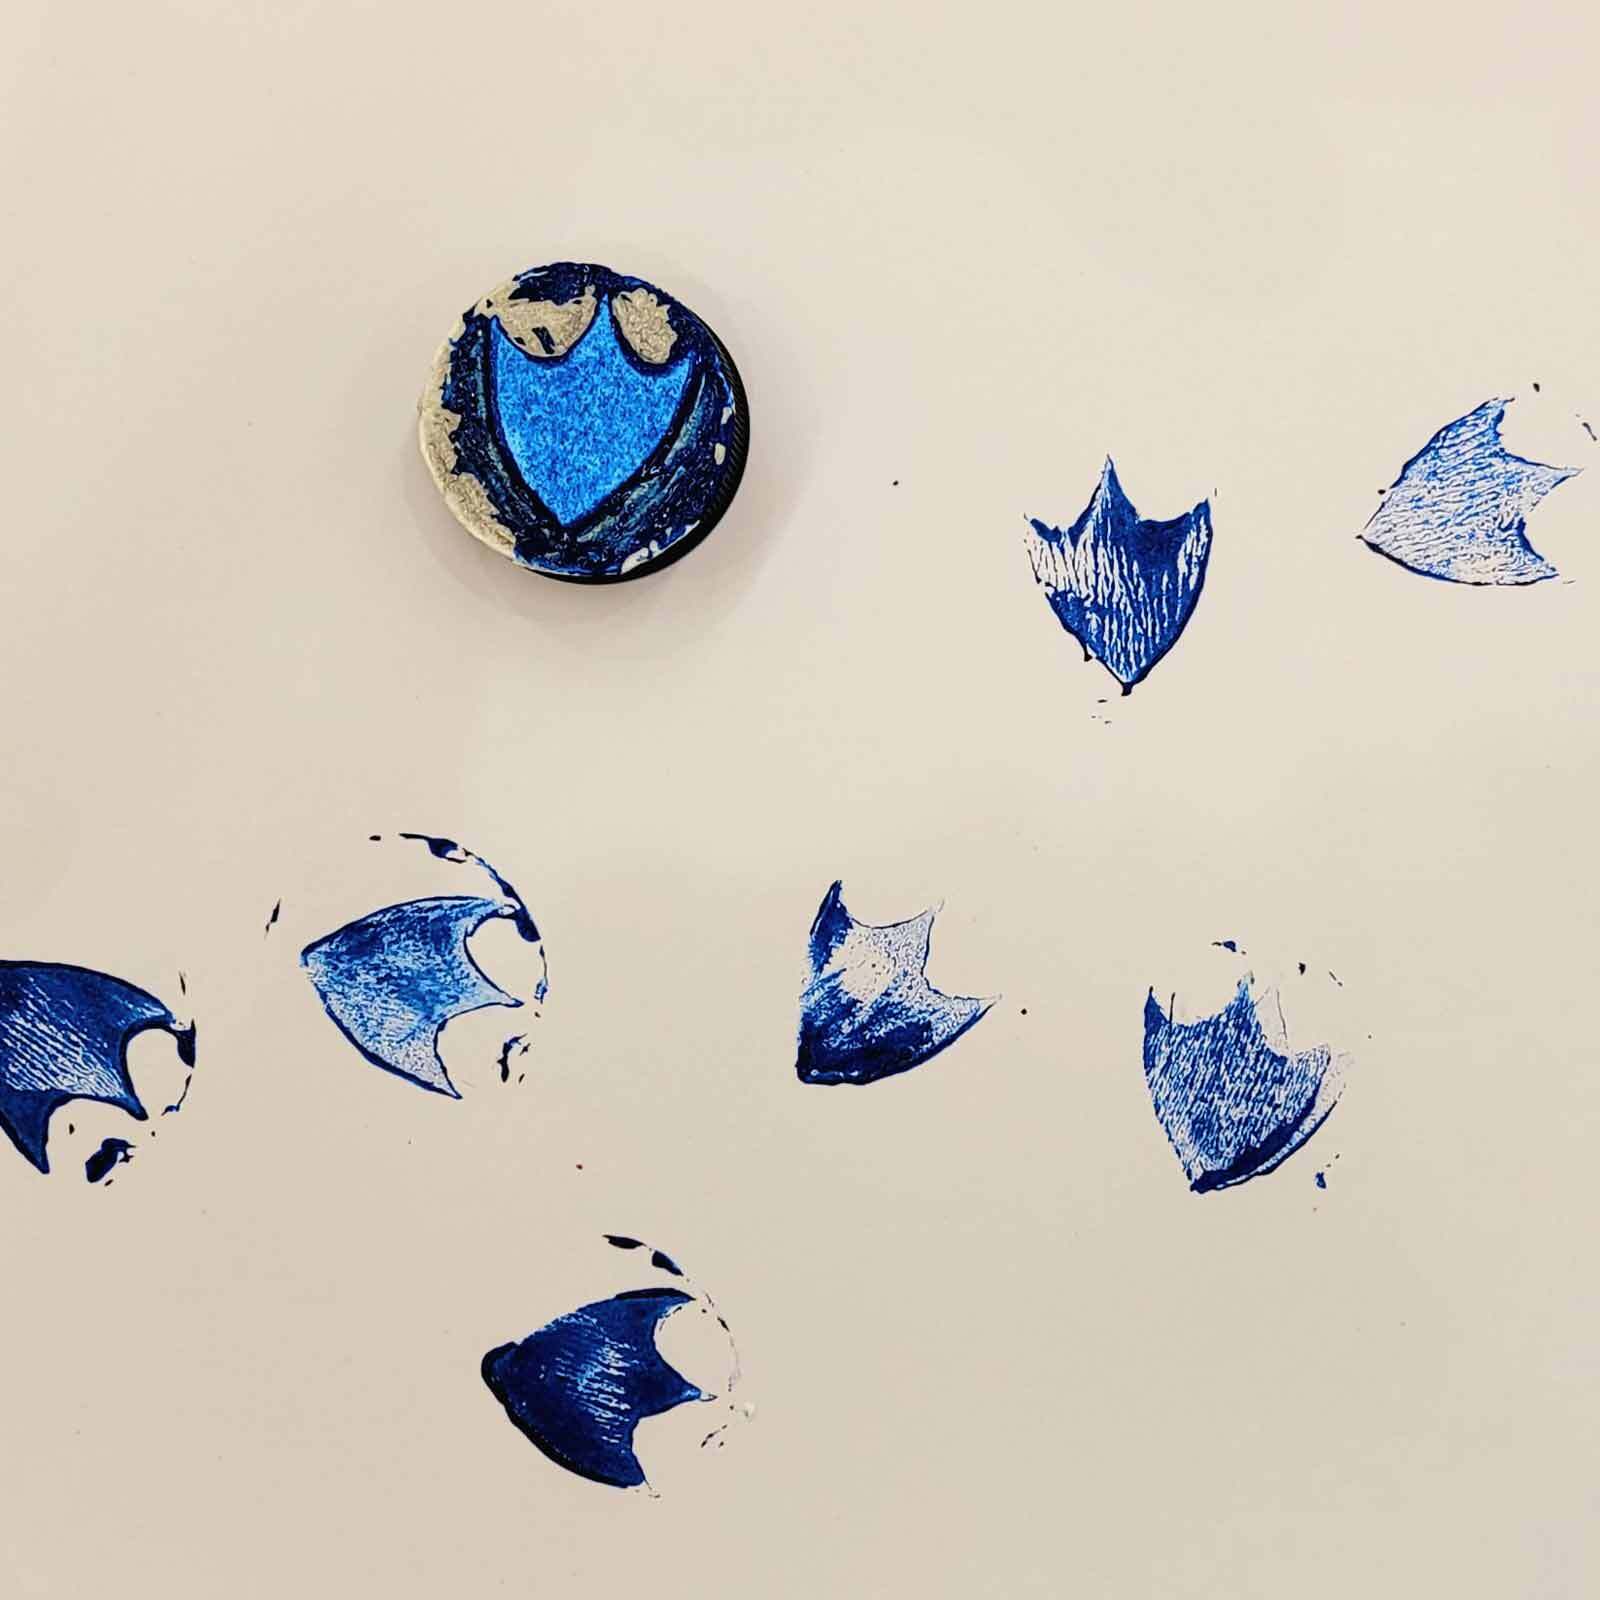 A porcelain object with a blue and white design is broken into multiple fragments against a simple backdrop.